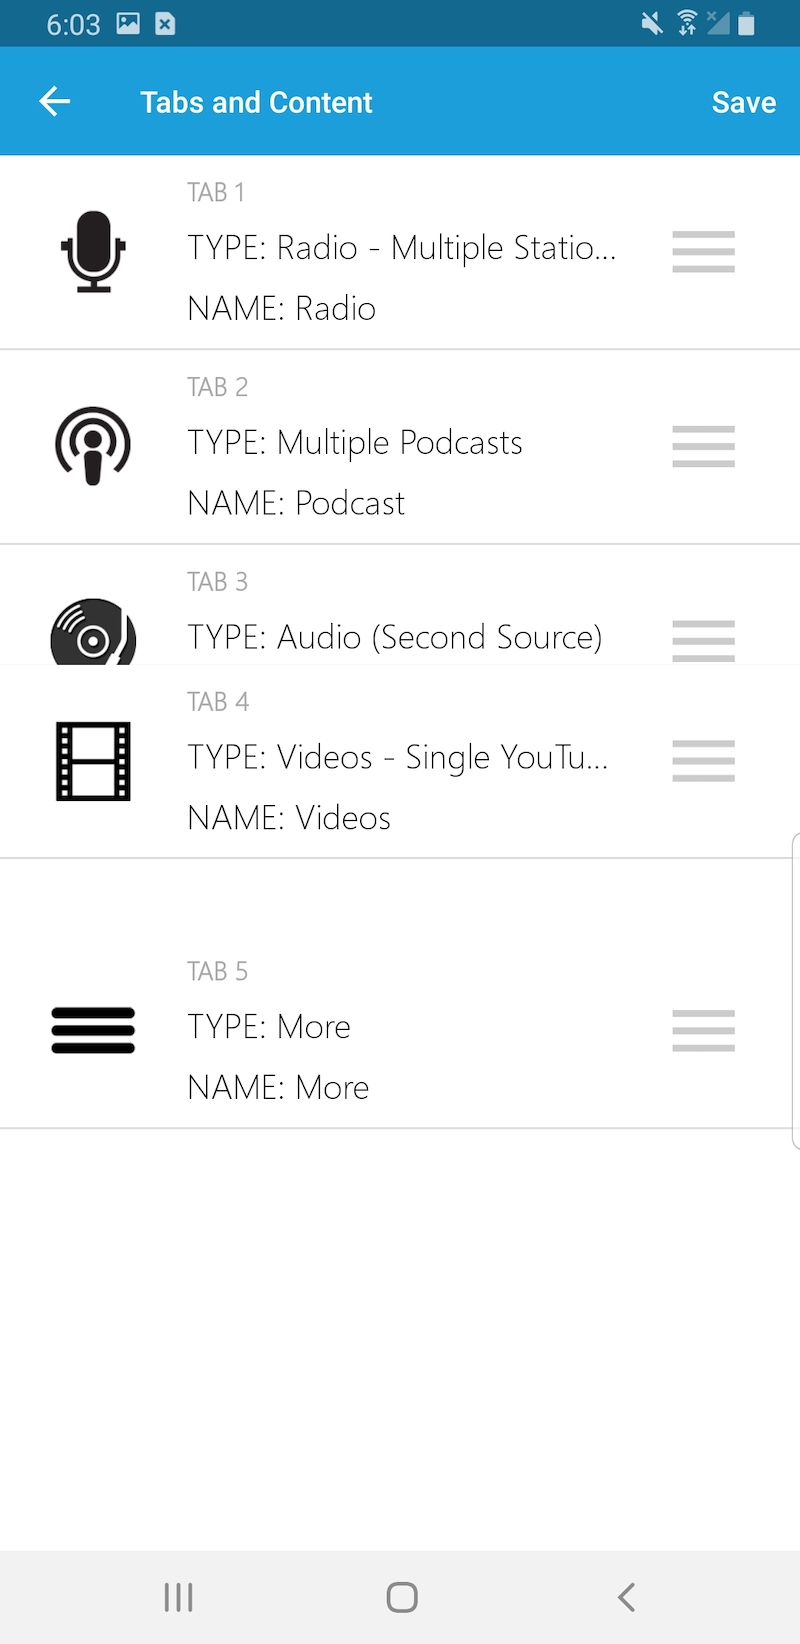 Tabs and Content (Move Tab) - BV Mobile Apps app